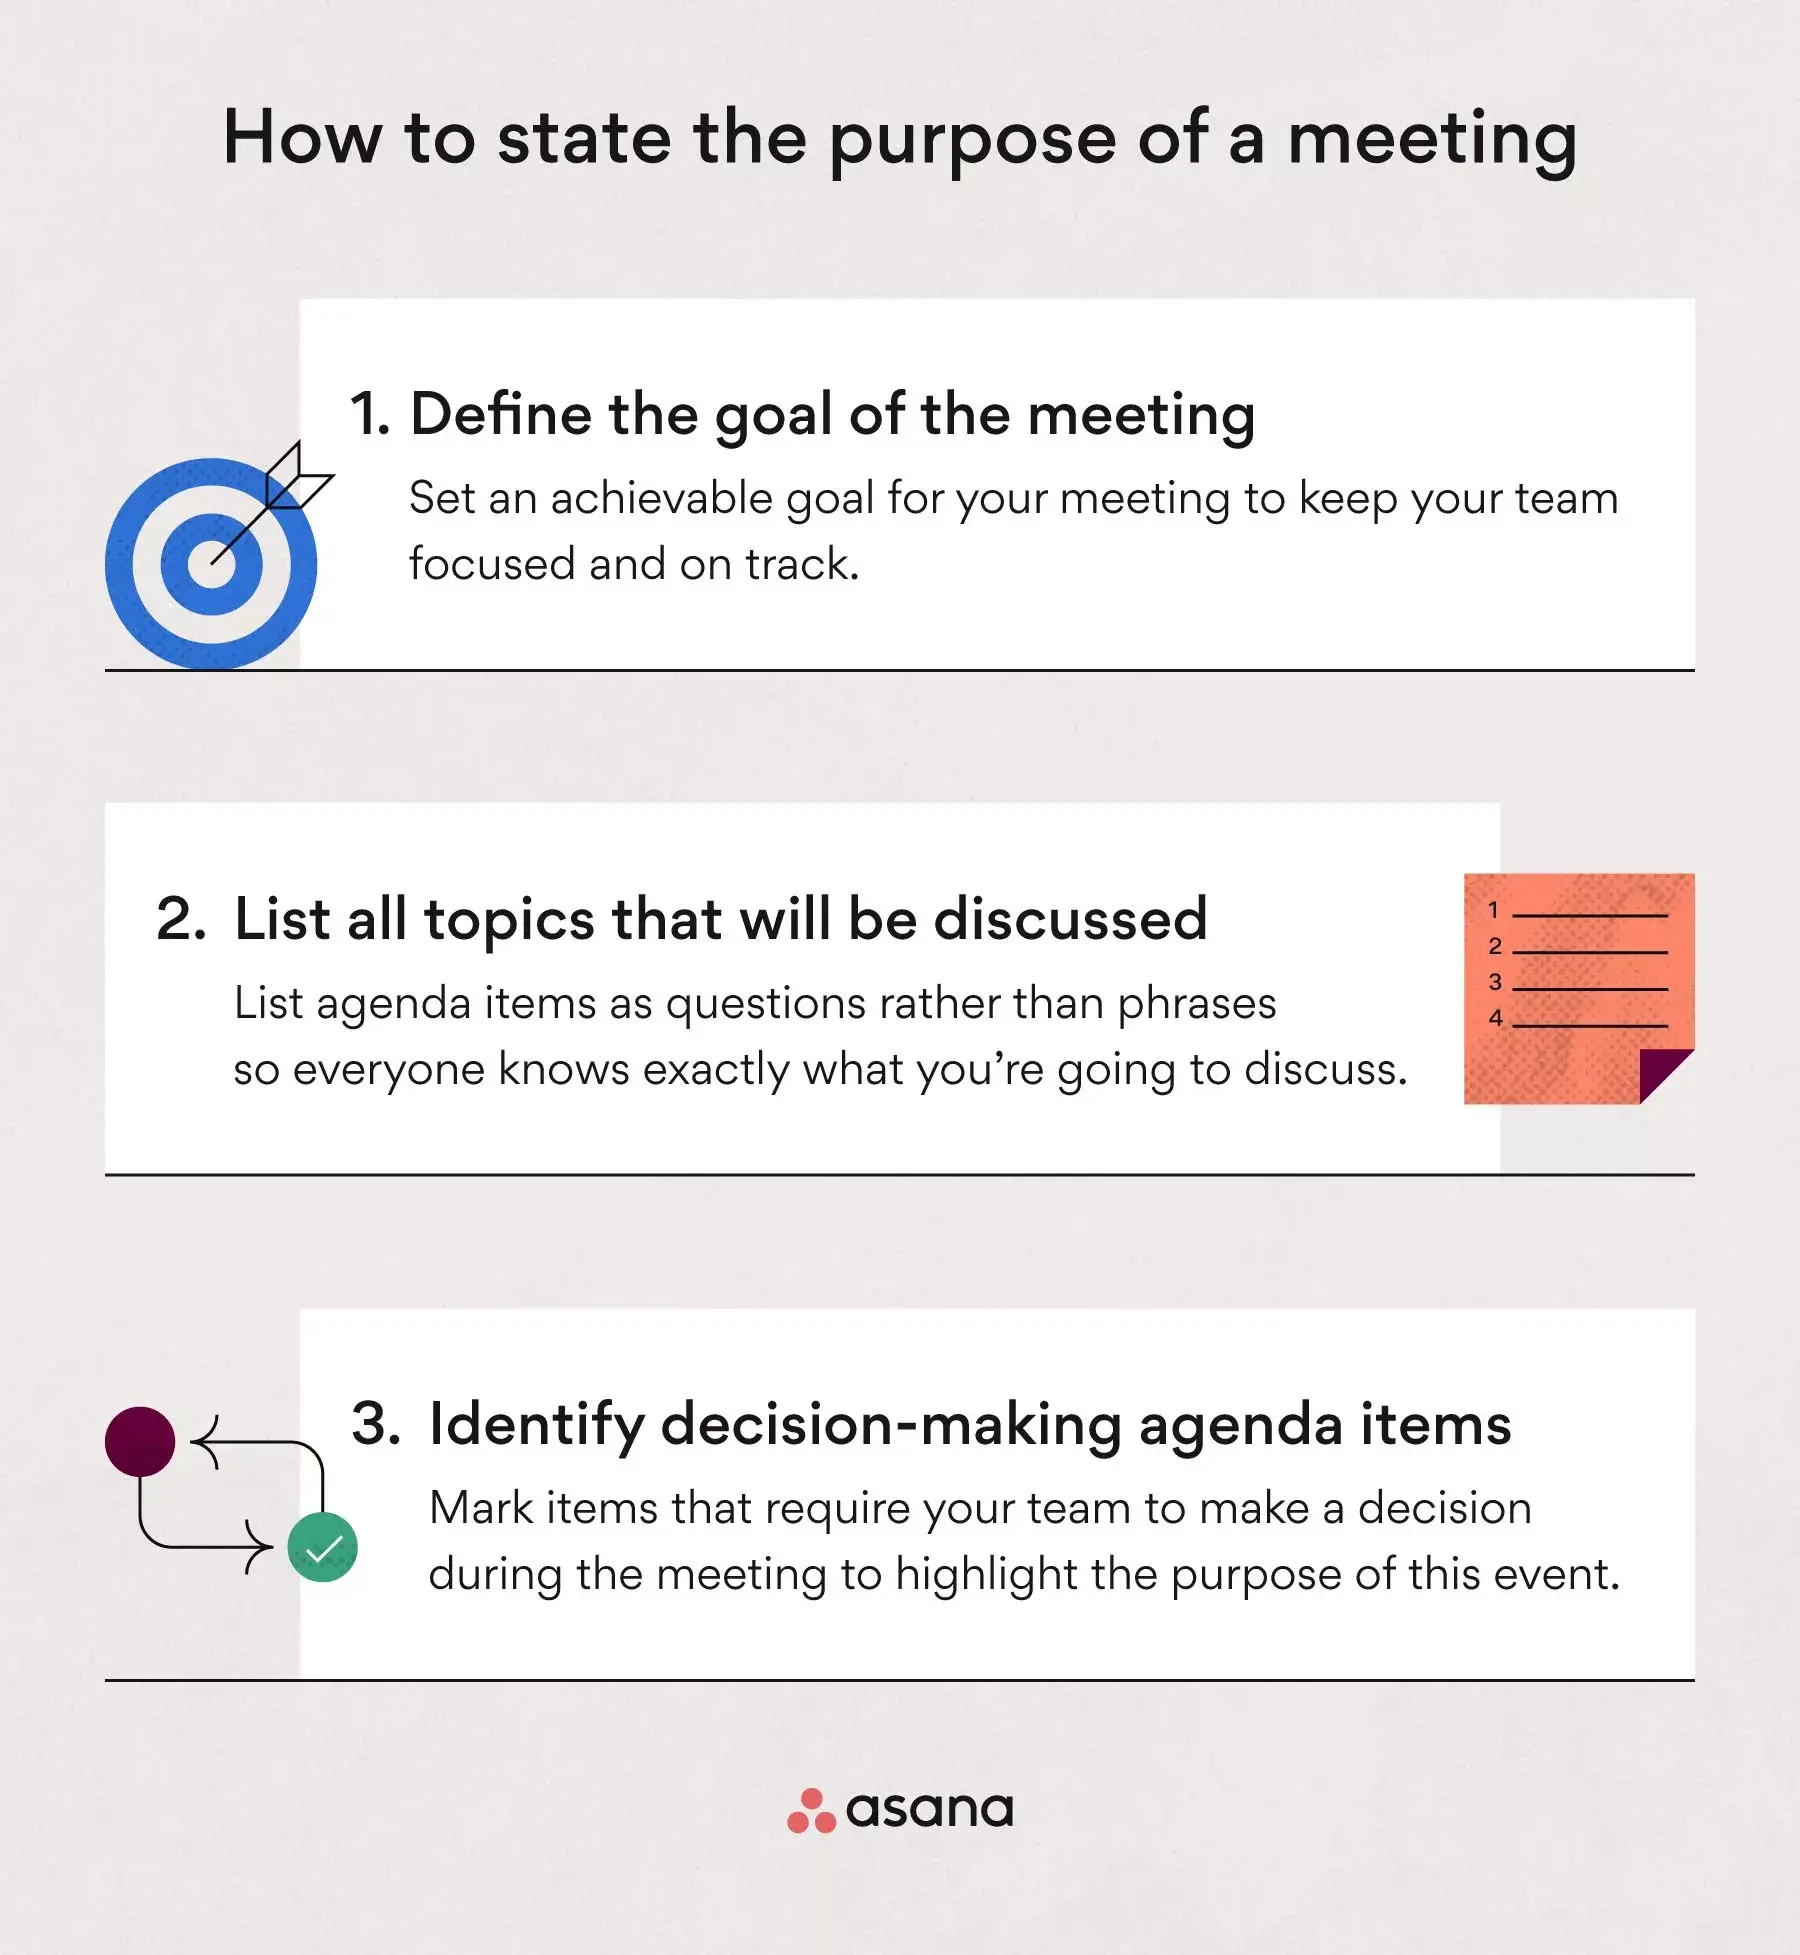 [inline illustration] how to state the purpose of a meeting in an agenda (infographic)